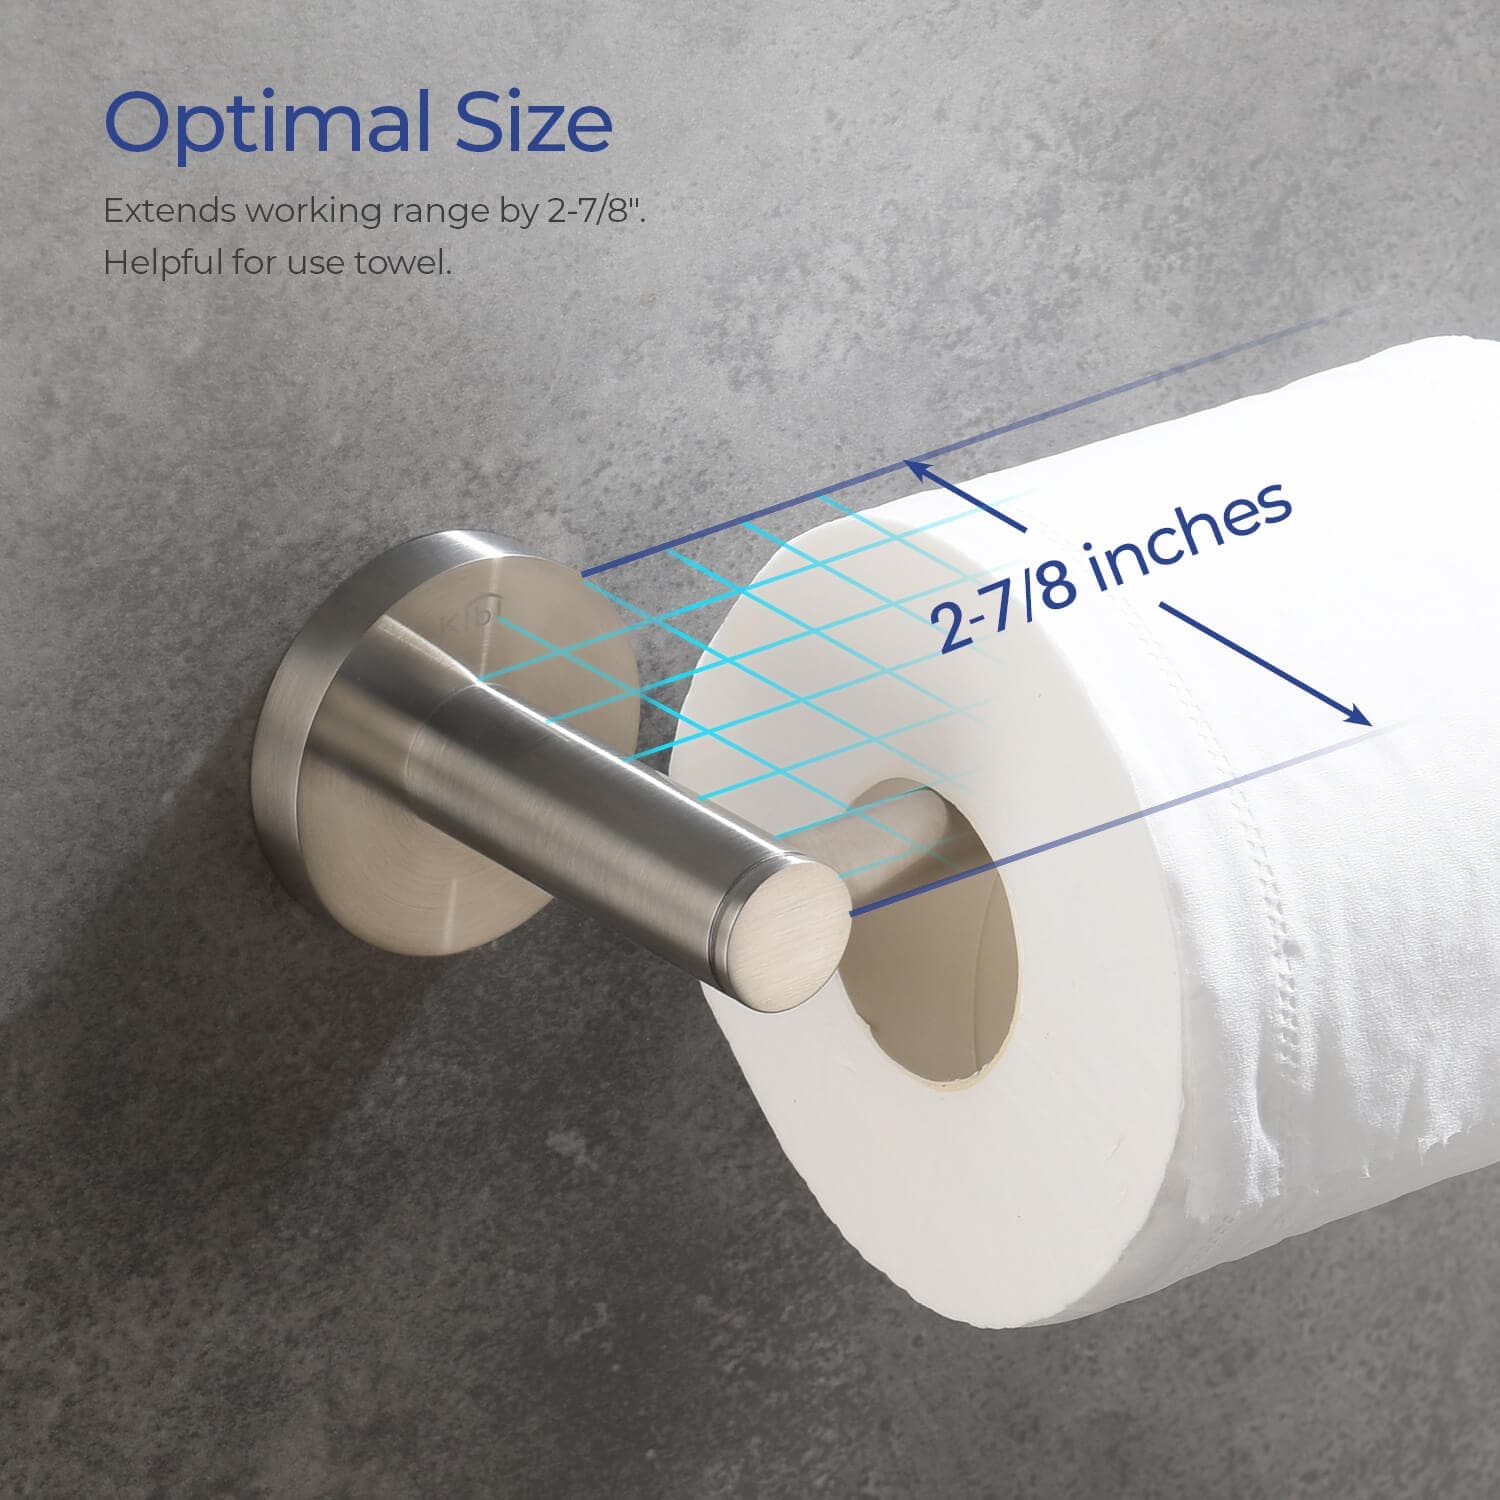 Self Adhesive toilet paper roll holder stand Wall Mount Stainless Steel  Tissue Towel Roll Dispenser Bath Kitchen WC Accessories